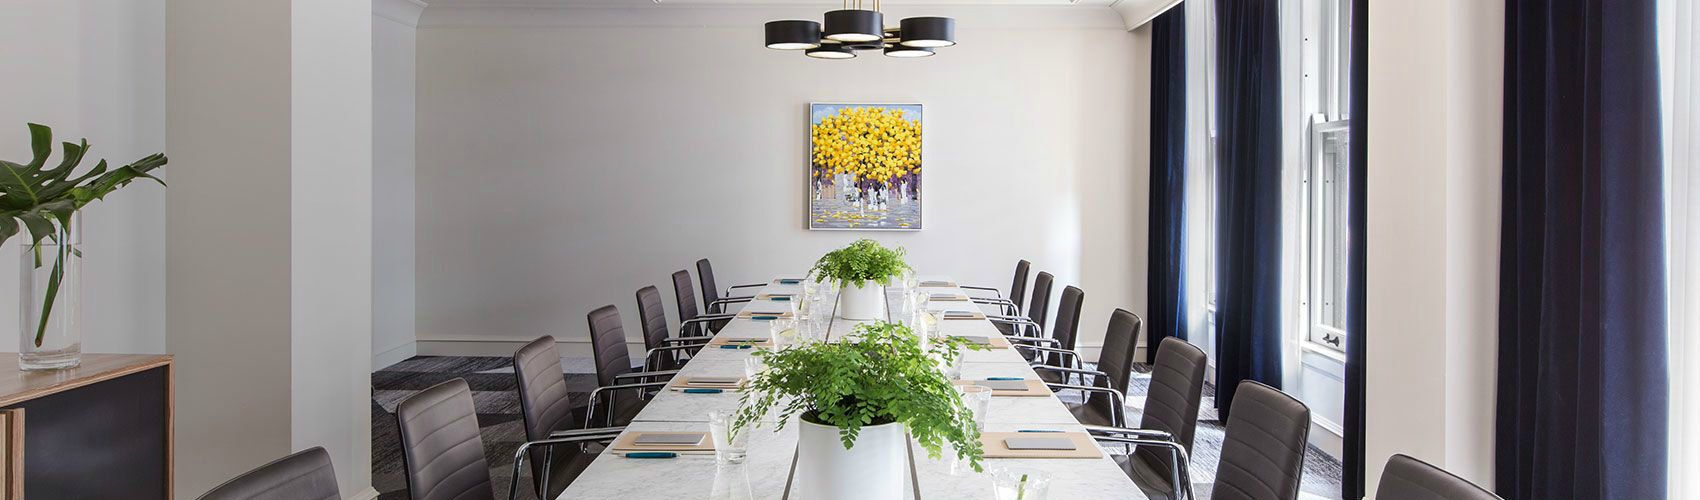 An upscale meeting room with potted plants on the table